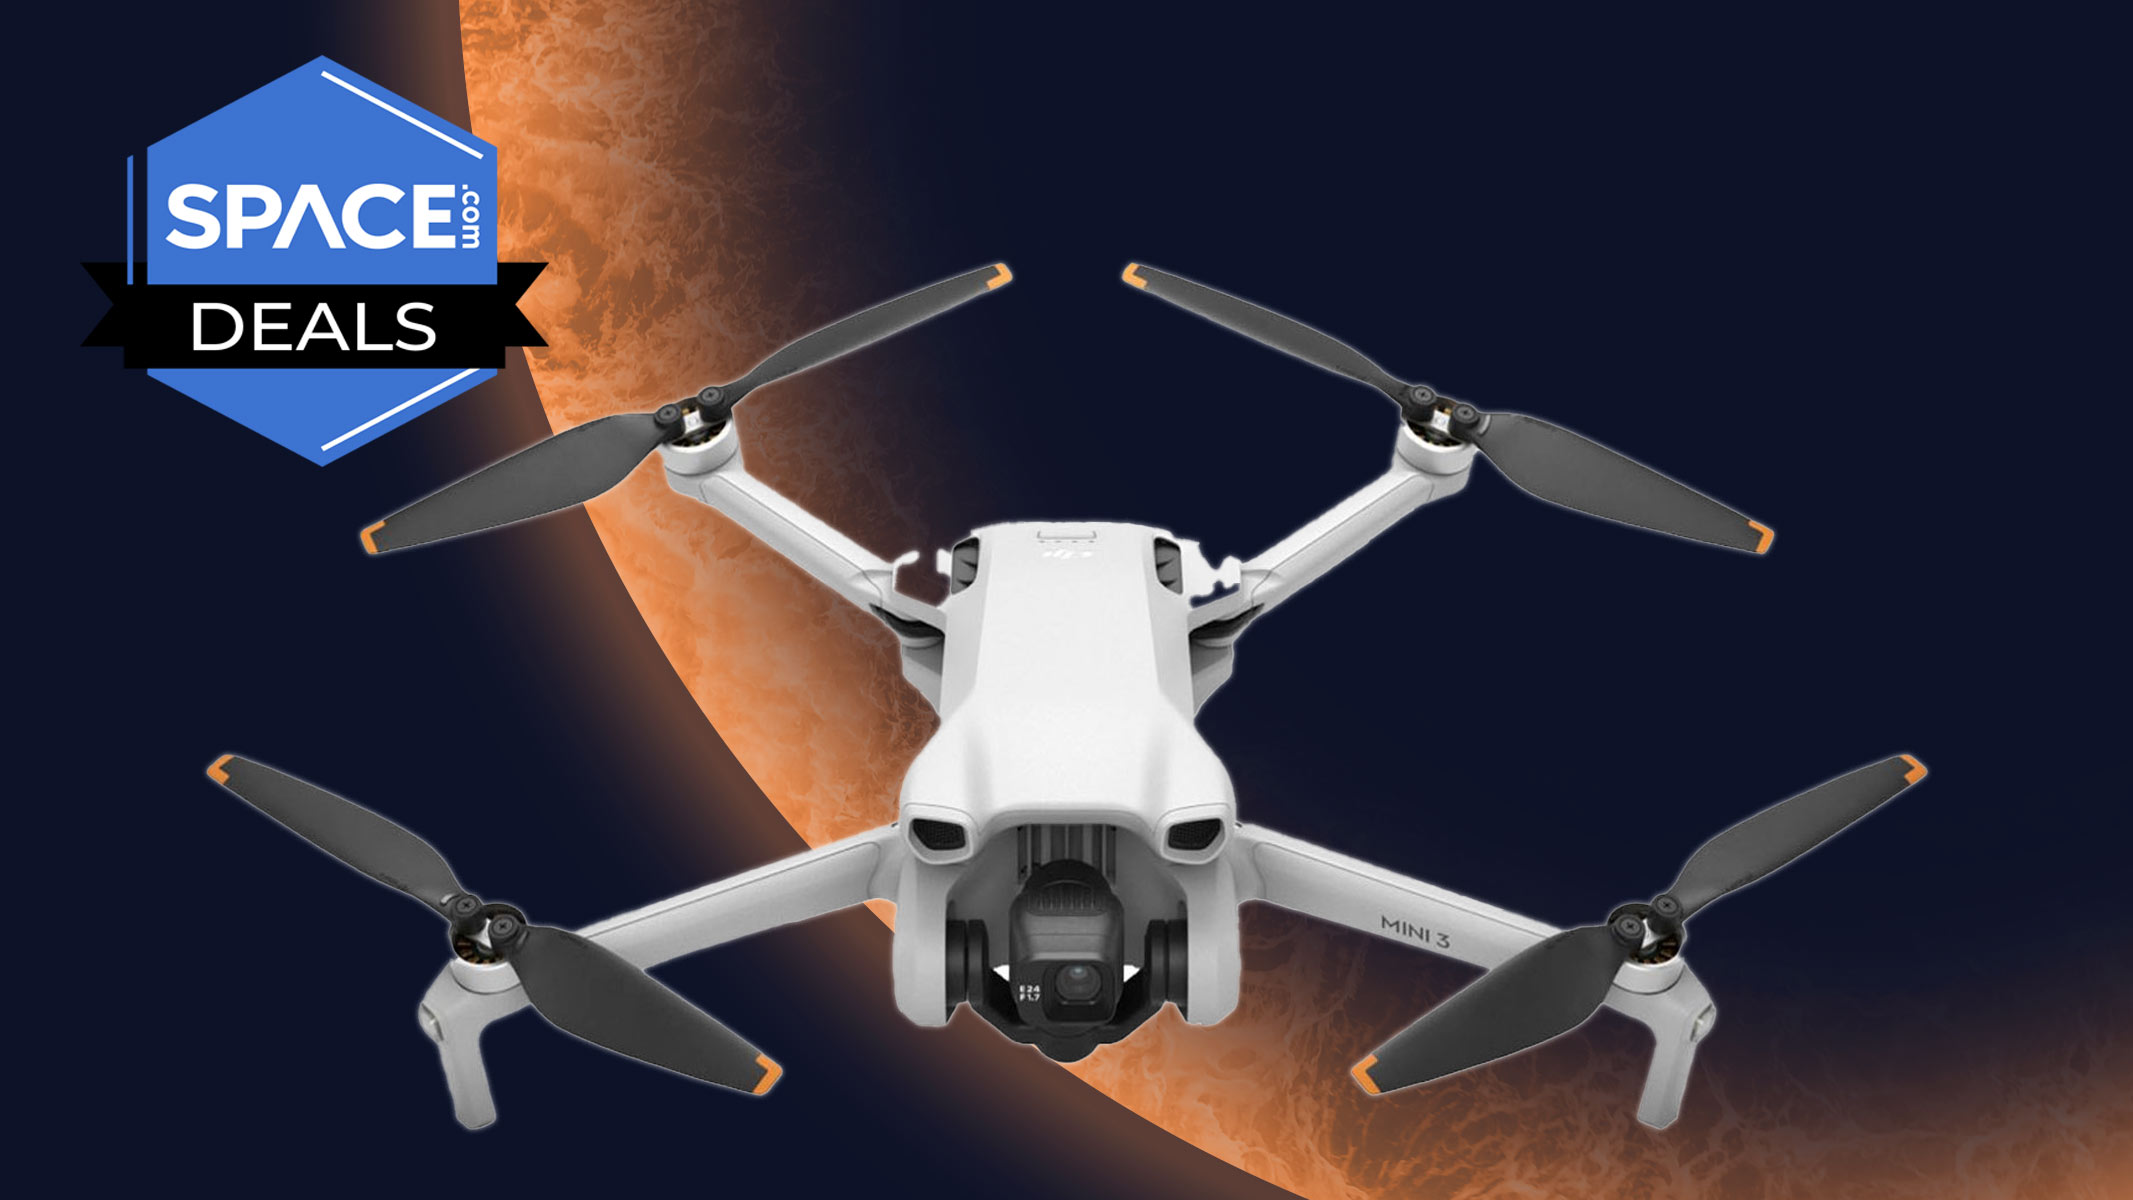 DJI Mini 3 drone in front of an orange planet background with a sticker in the top left corner showing space.com's logo